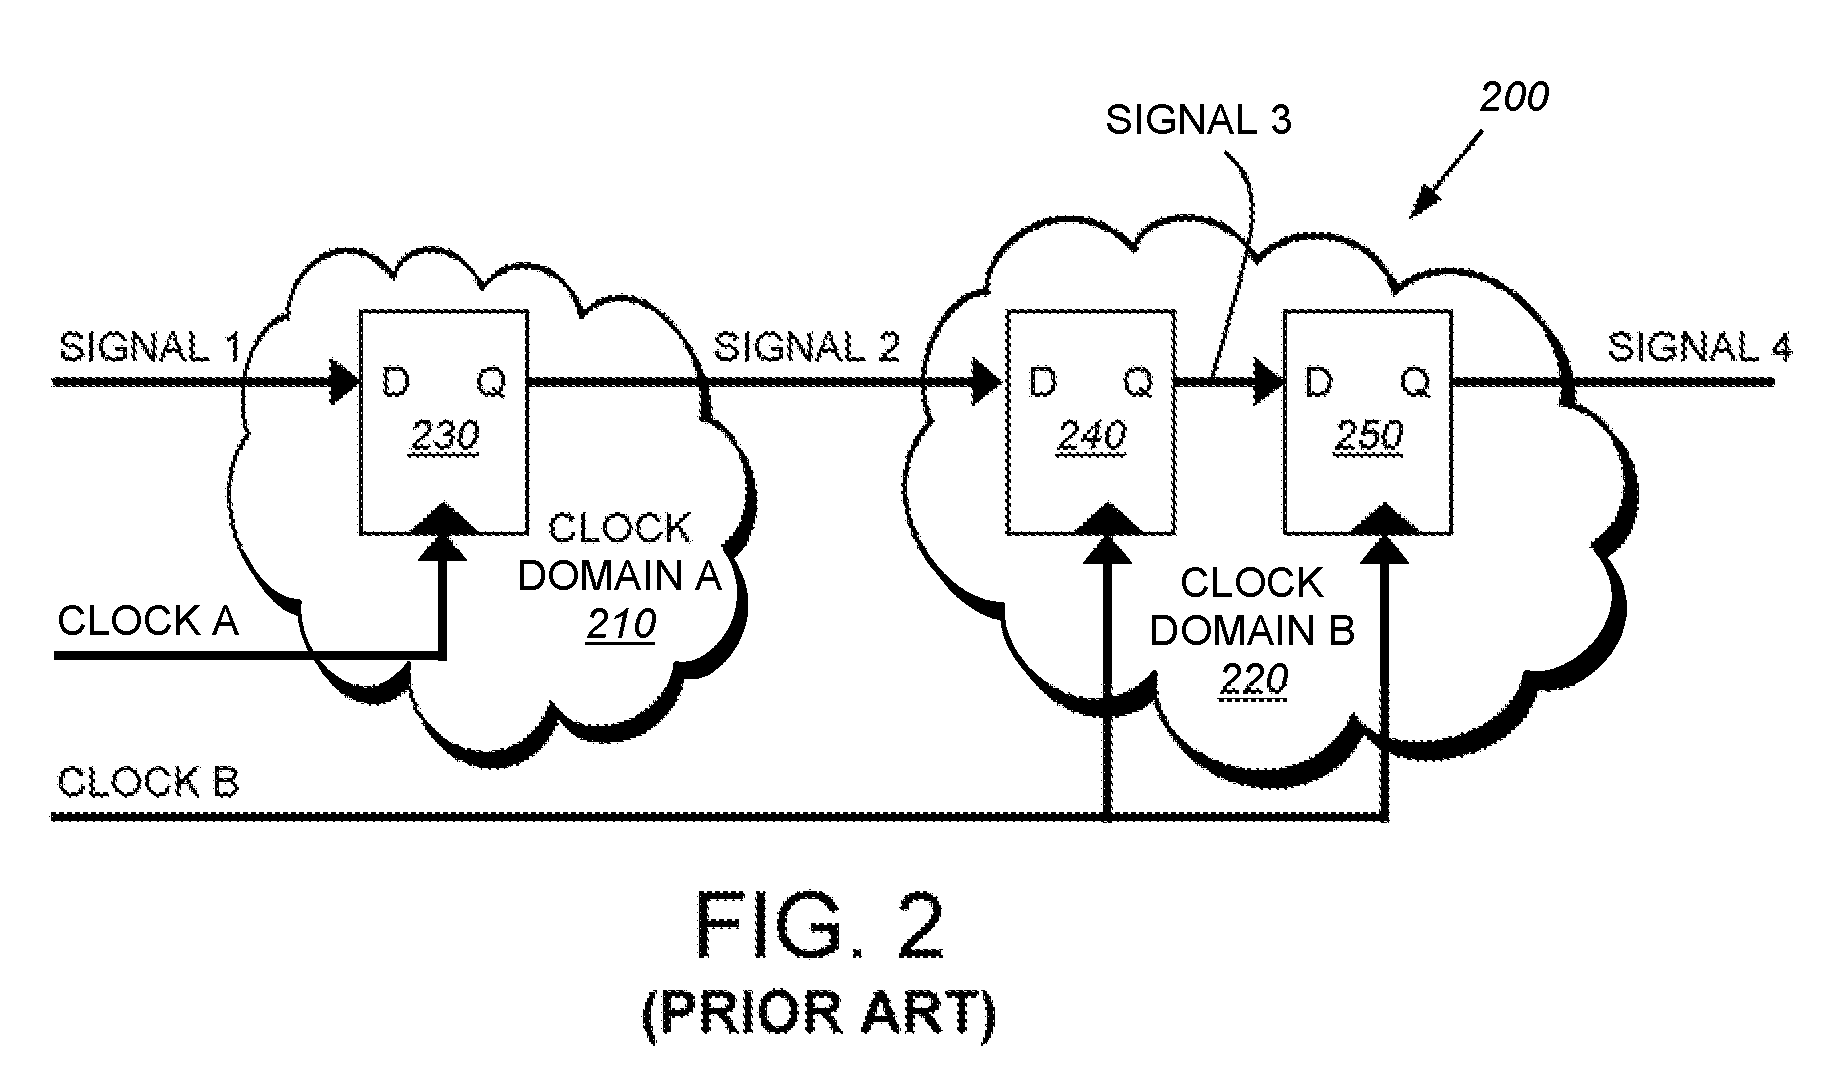 System and method for designing multiple clock domain circuits